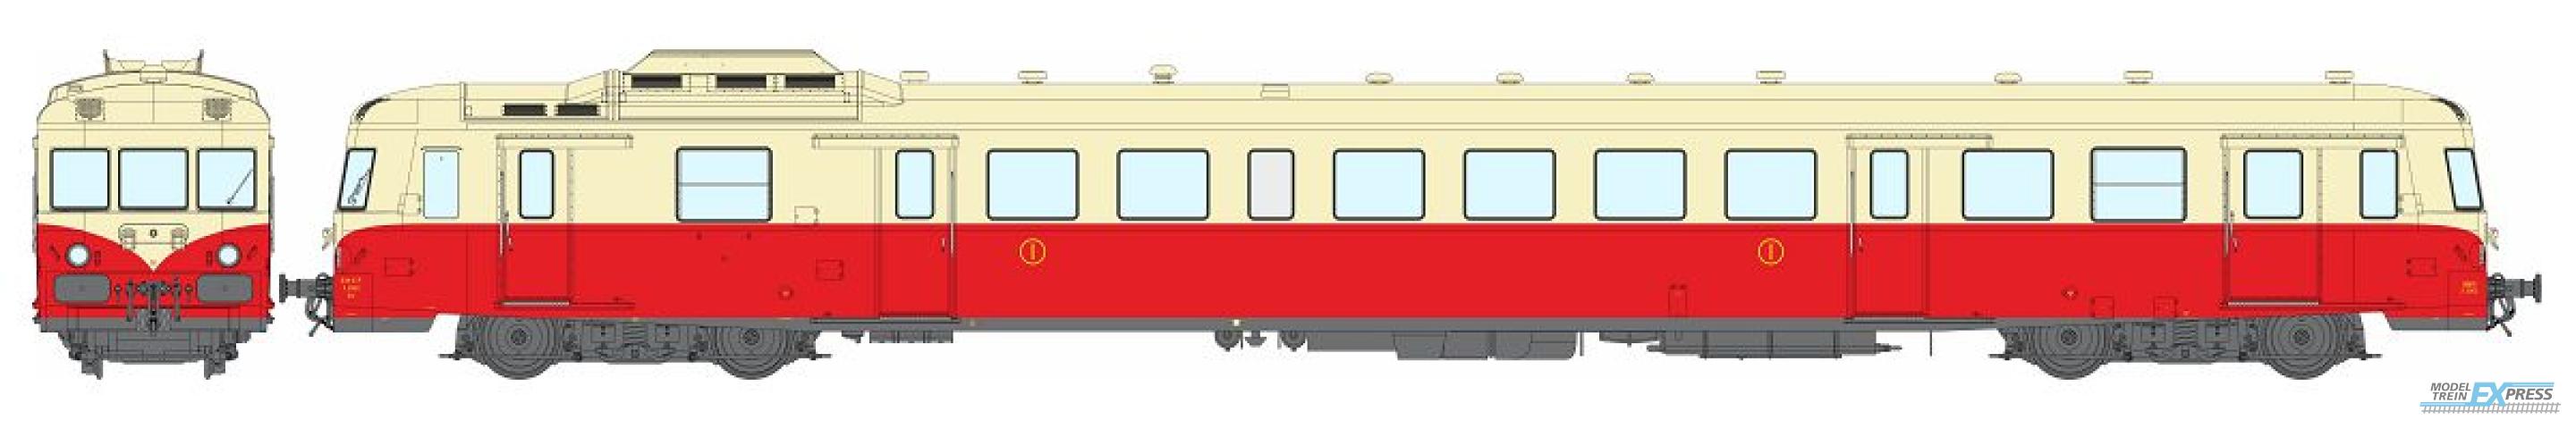 REE models MB-227S X 2902 with skirt, 1st class Origin, Red 605 and Cream 407, NANCY, SNCF Era.III - DCC Sound Functional Pantos